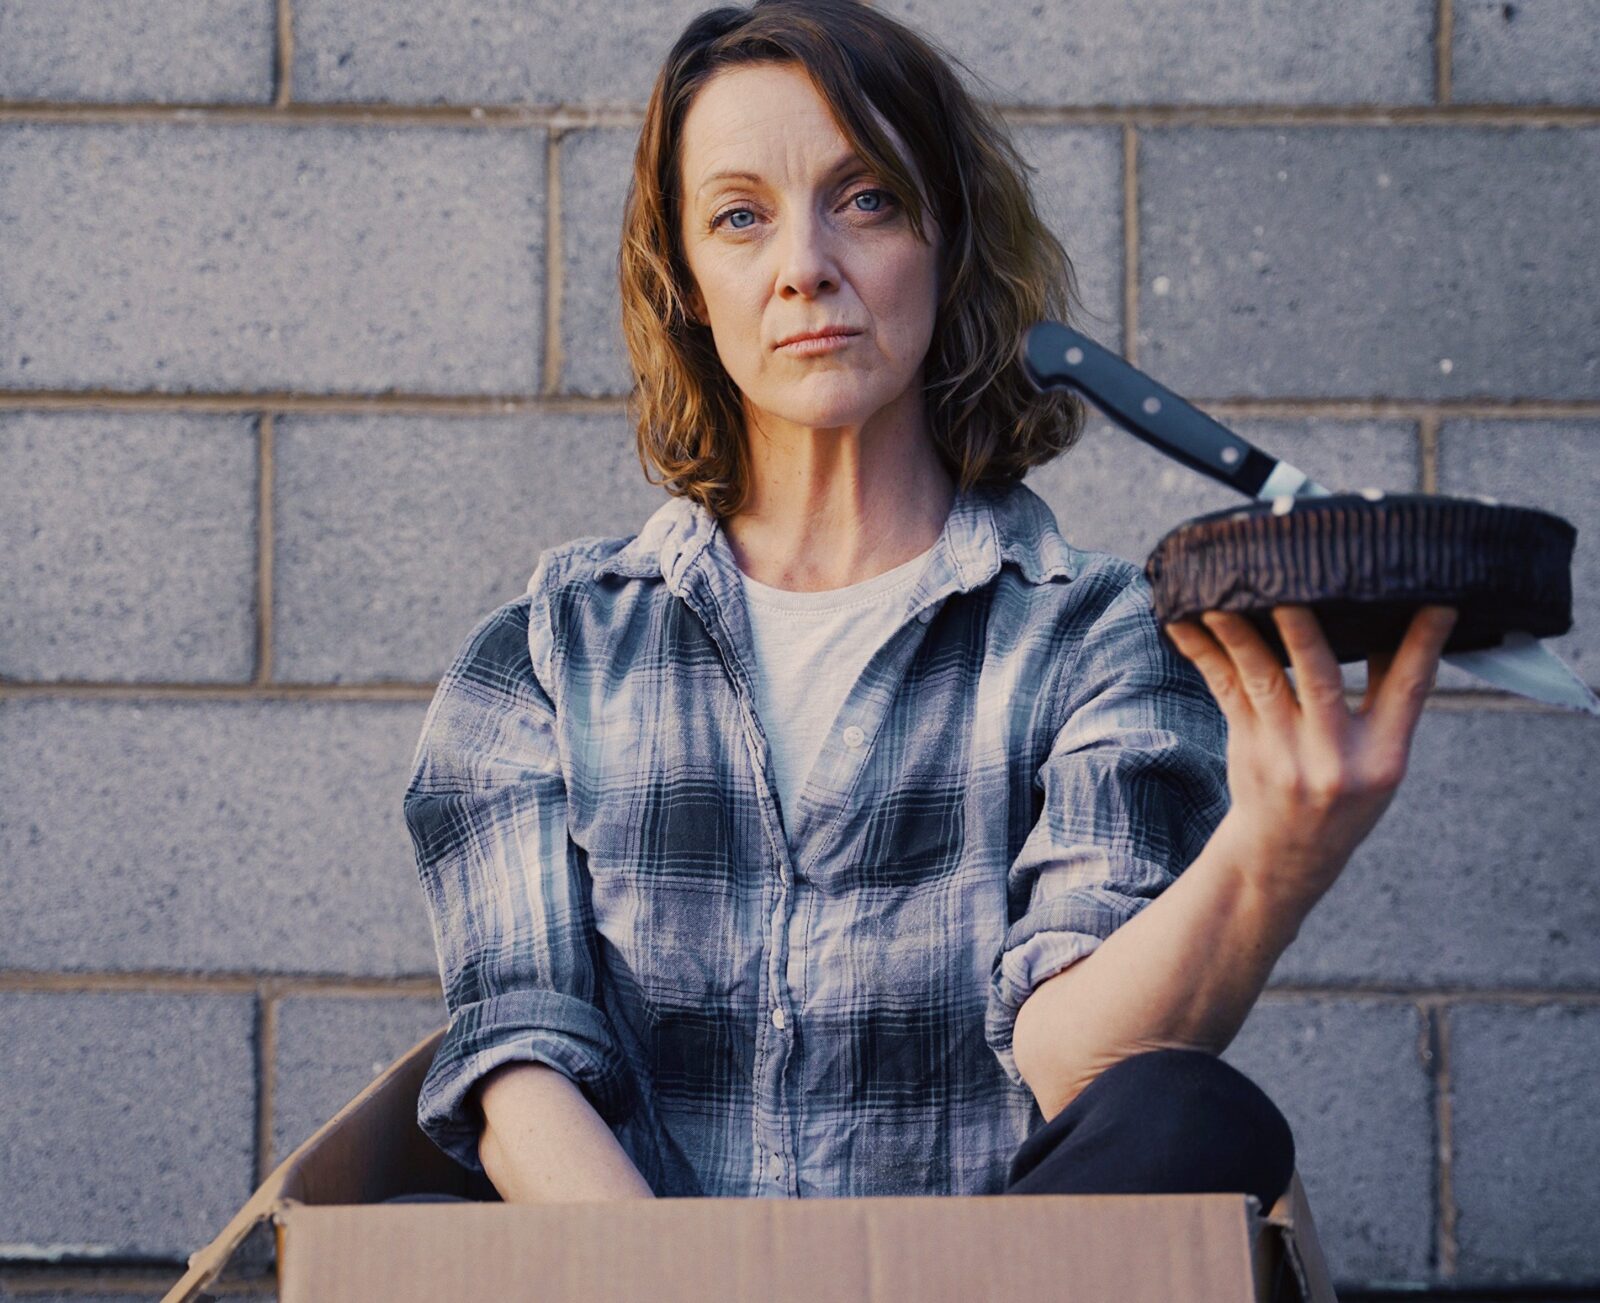 A woman in a flannelette shirt sits in a box, a woolies mudcake with a knife in her hand